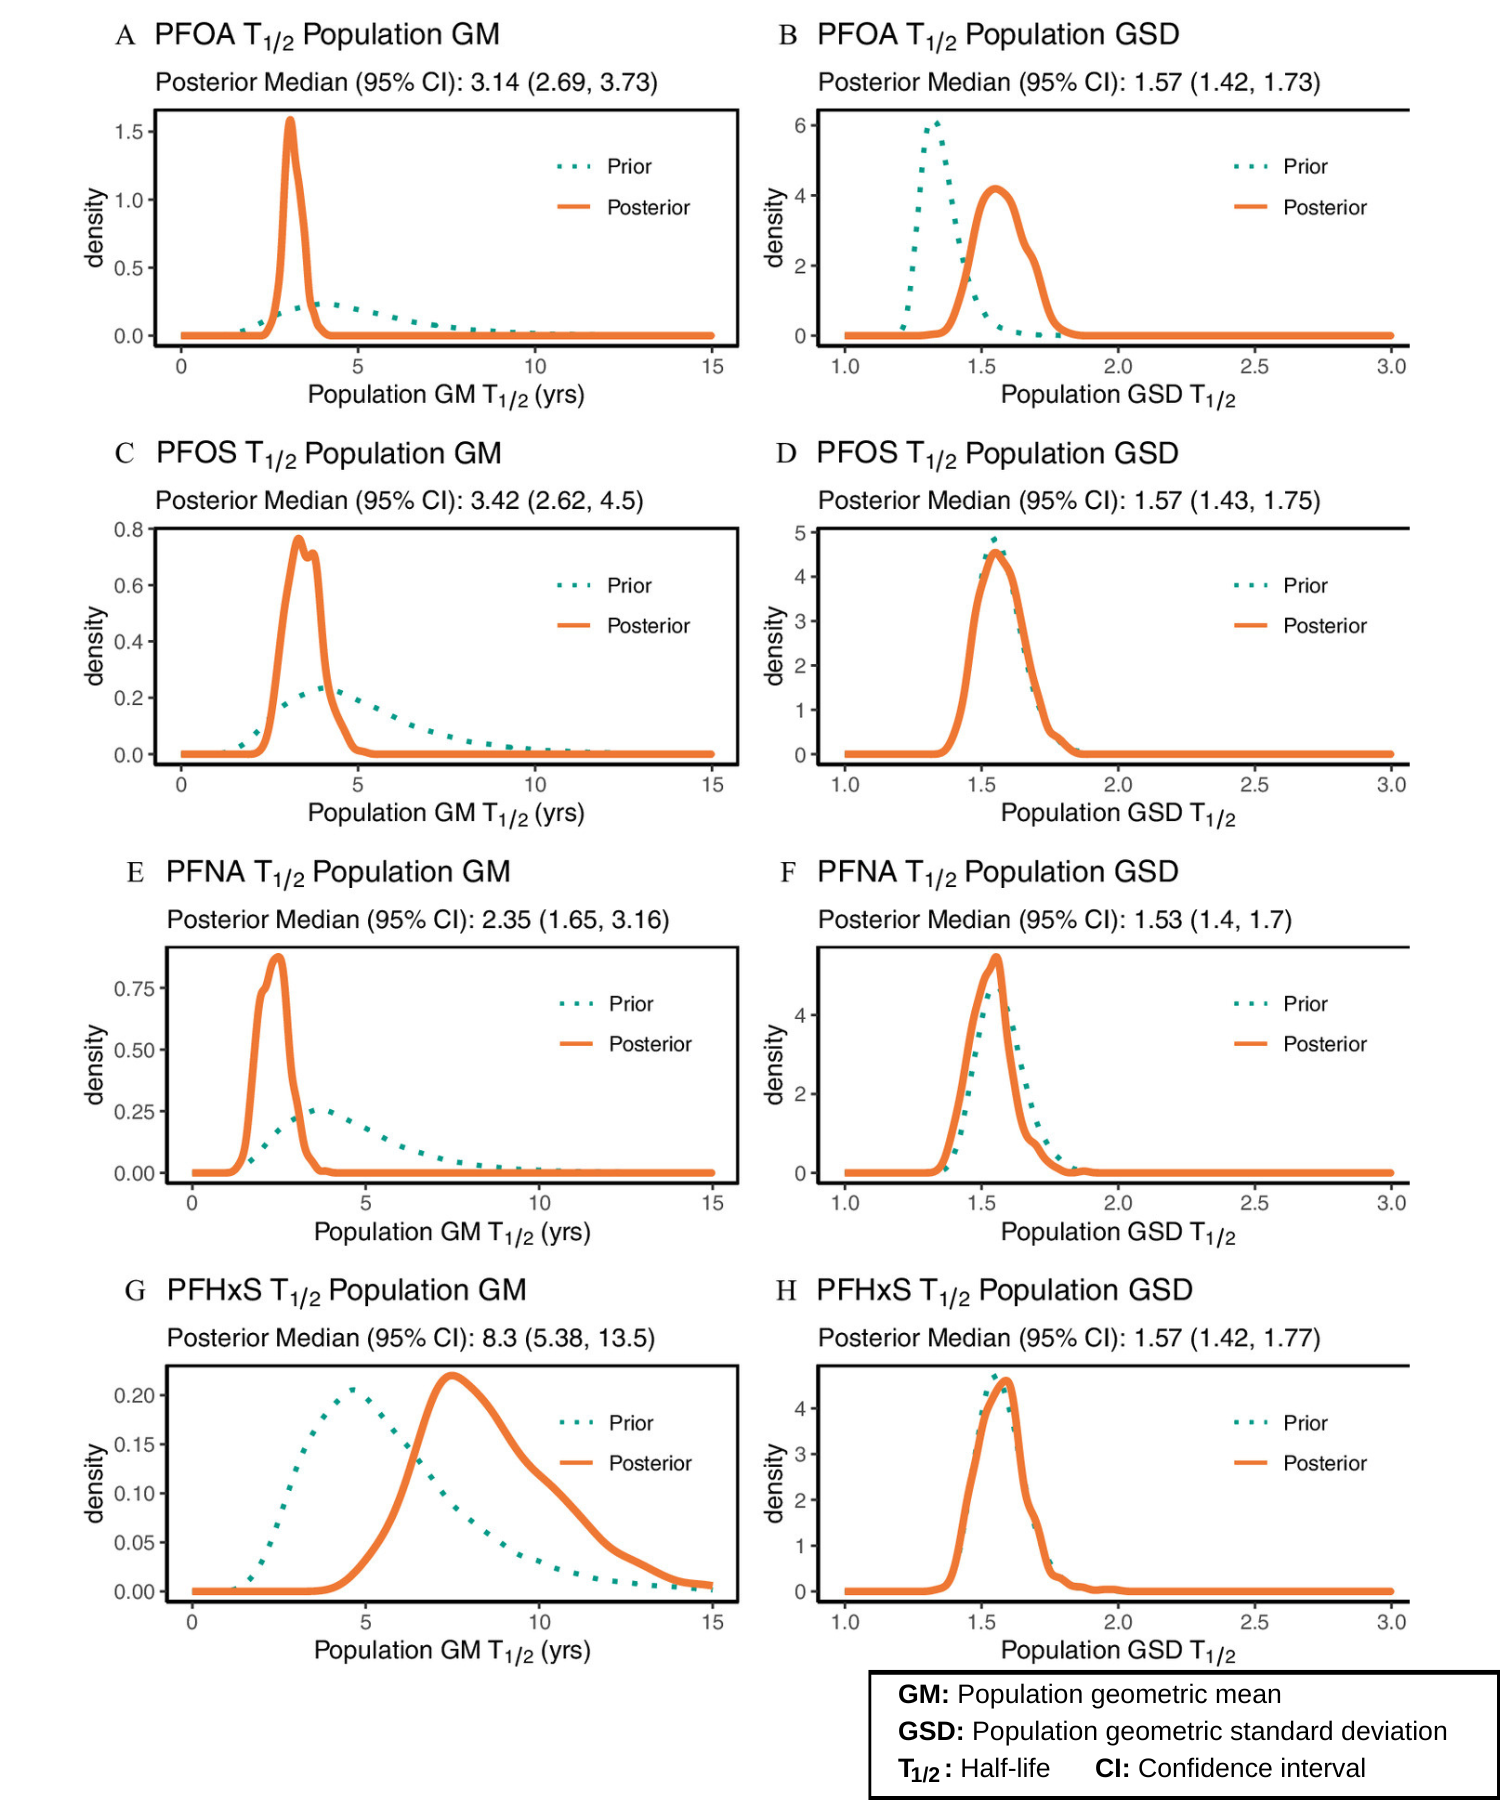 8 line graphs, labeled from A to H in ascending order. Prior and posterior distributions for half-life (T½). Comparison of priors (cyan dotted lines) and posteriors (orange lines) for (A,C,E,G) T½ population geometric mean (GM) and (B,D,F,H) population geometric standard deviation (GSD) for (A,B) perfluorooctanoic acid (PFOA), (C,D) perfluorooctane sulfonic acid (PFOS), (E,F) perfluorononanoic acid (PFNA), and (G,H) perfluorohexane sulfonate (PFHxS). Text includes posterior median and confidence intervals (CI). The underlying numeric values are presented in Tables 2 and ​and33 and in the text.